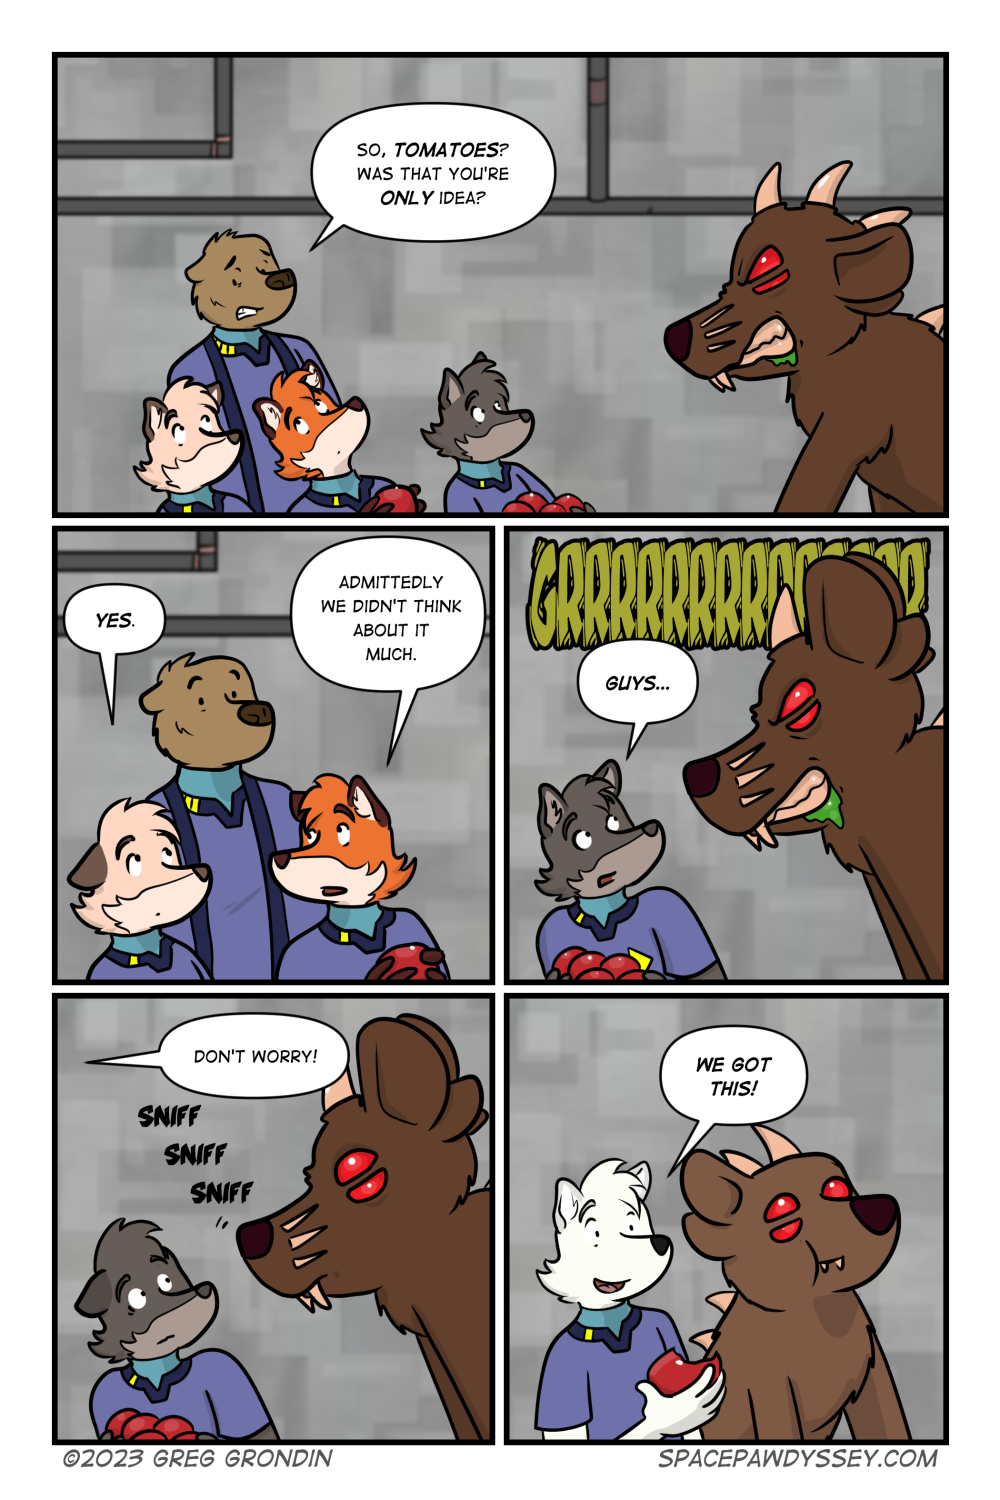 Space Pawdyssey #622